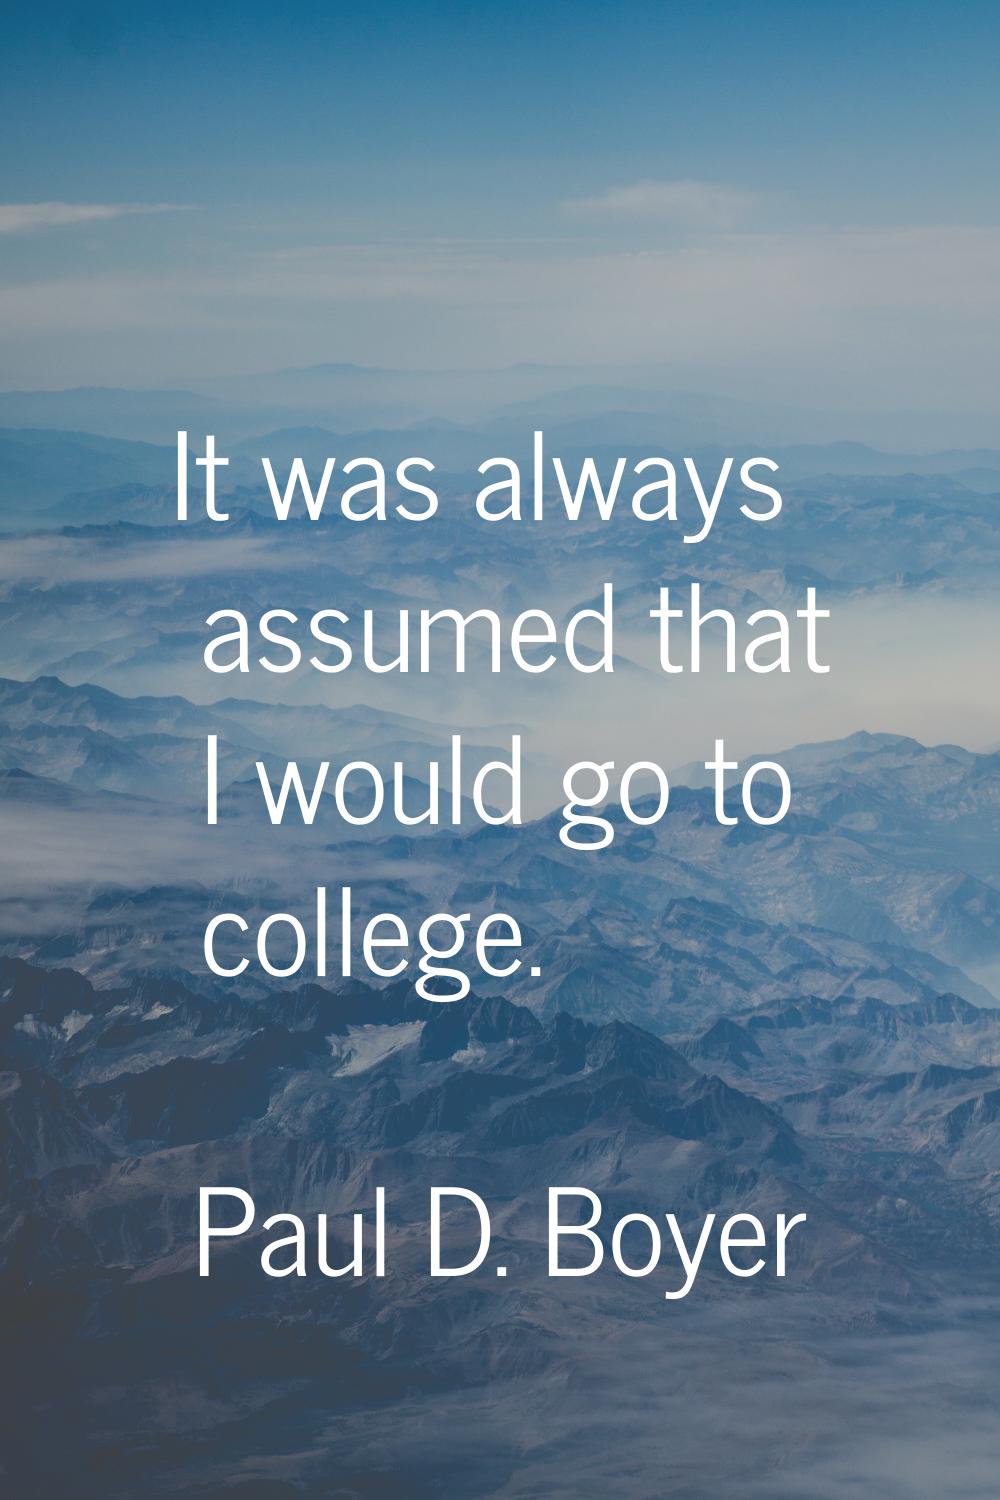 It was always assumed that I would go to college.